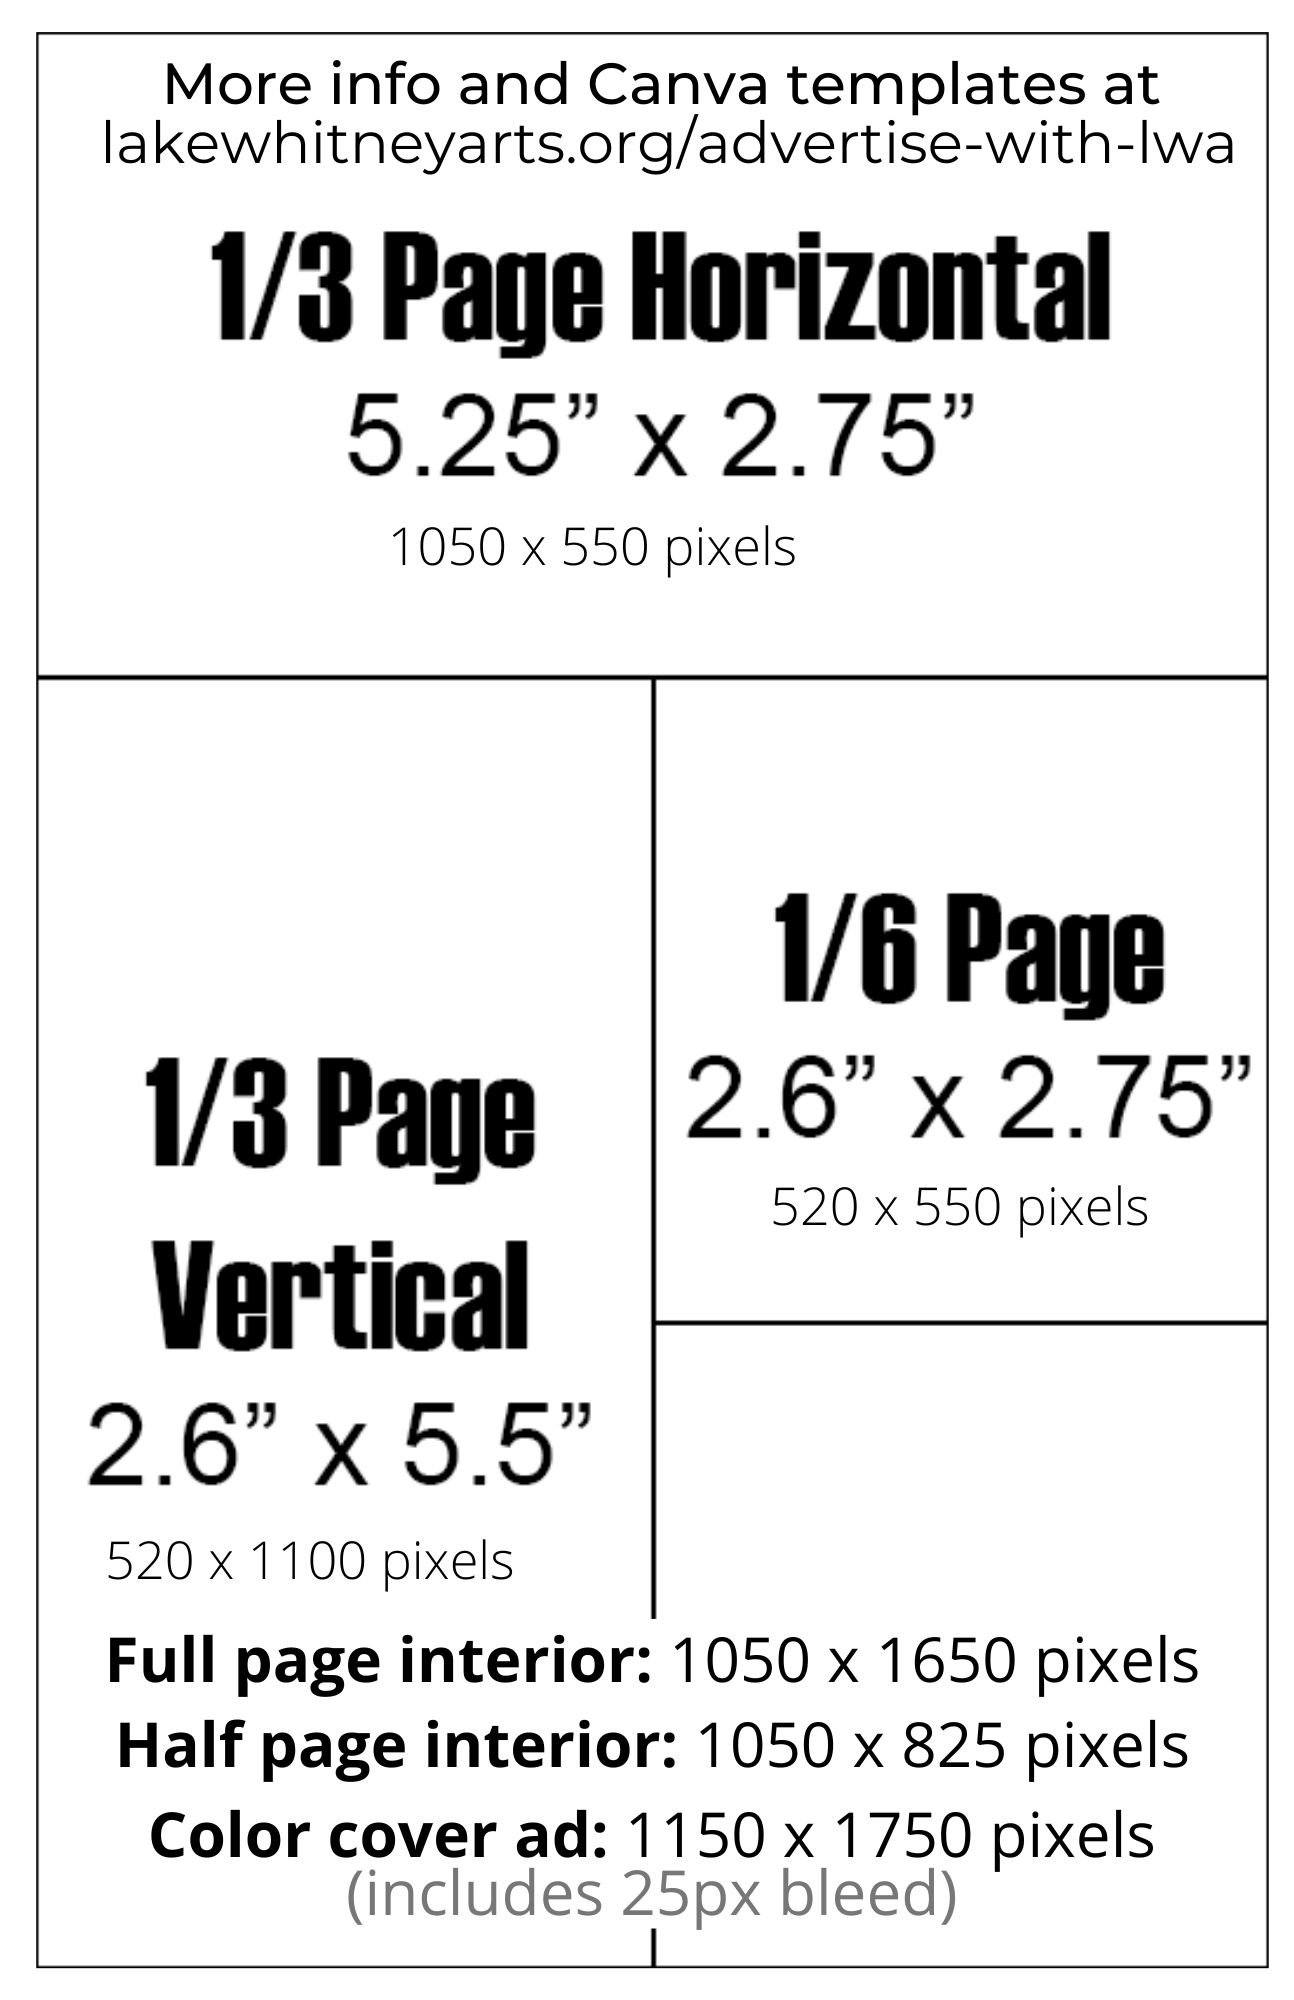 Ad sizes and pixel dimensions